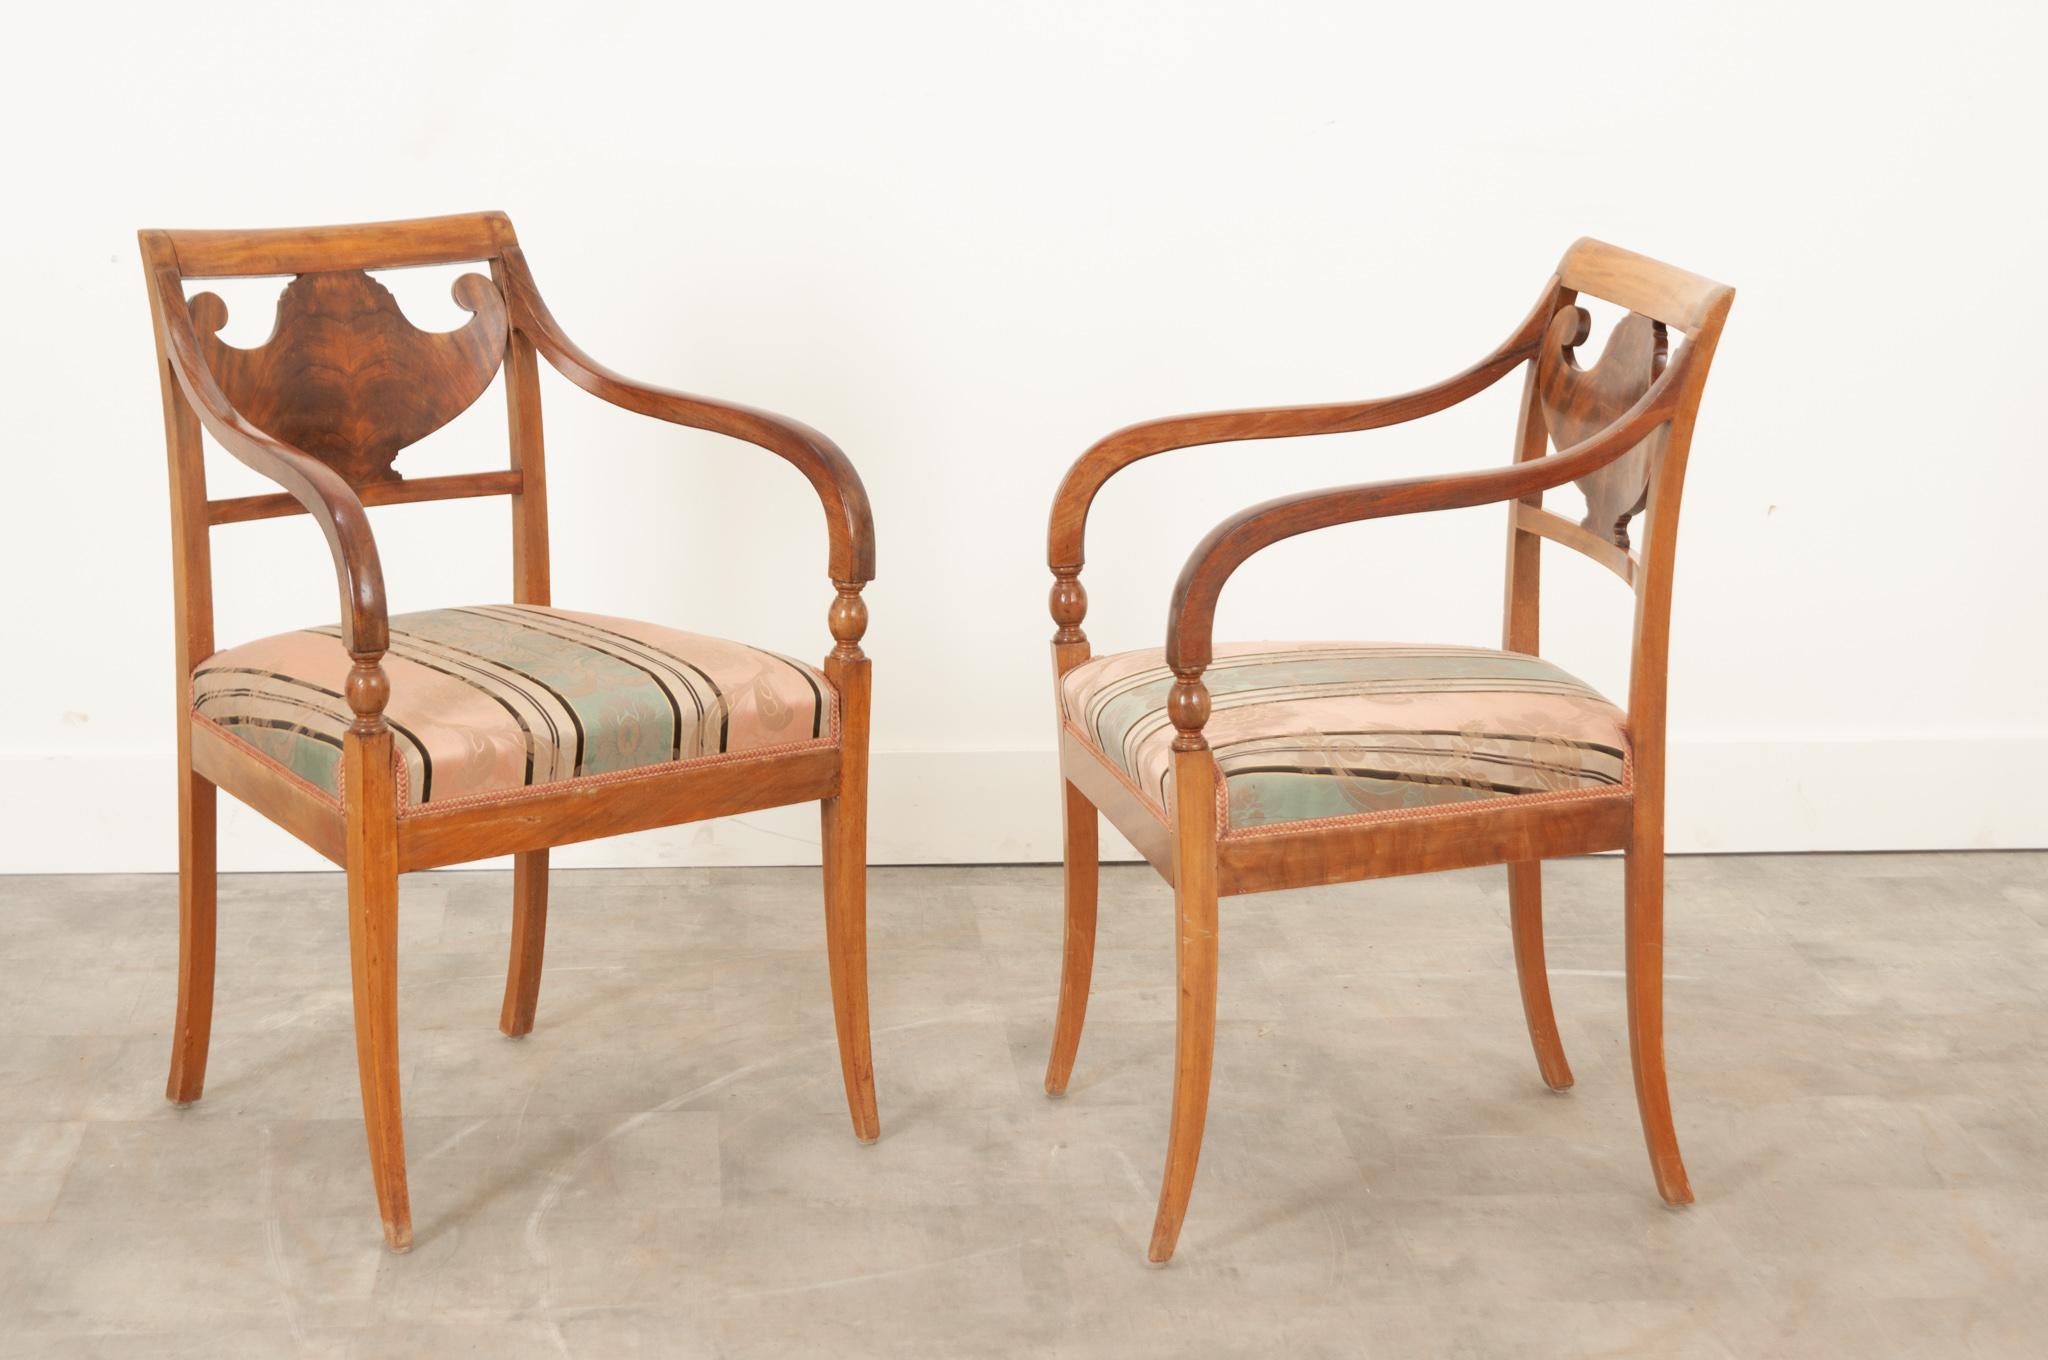 A gorgeous pair of satinwood armchairs, made in The Netherlands during the 19th century. Influenced by English Regency and French Empire styles, the pair have a delightful, delicate design that is airy and light, but also proud and resolute. Each